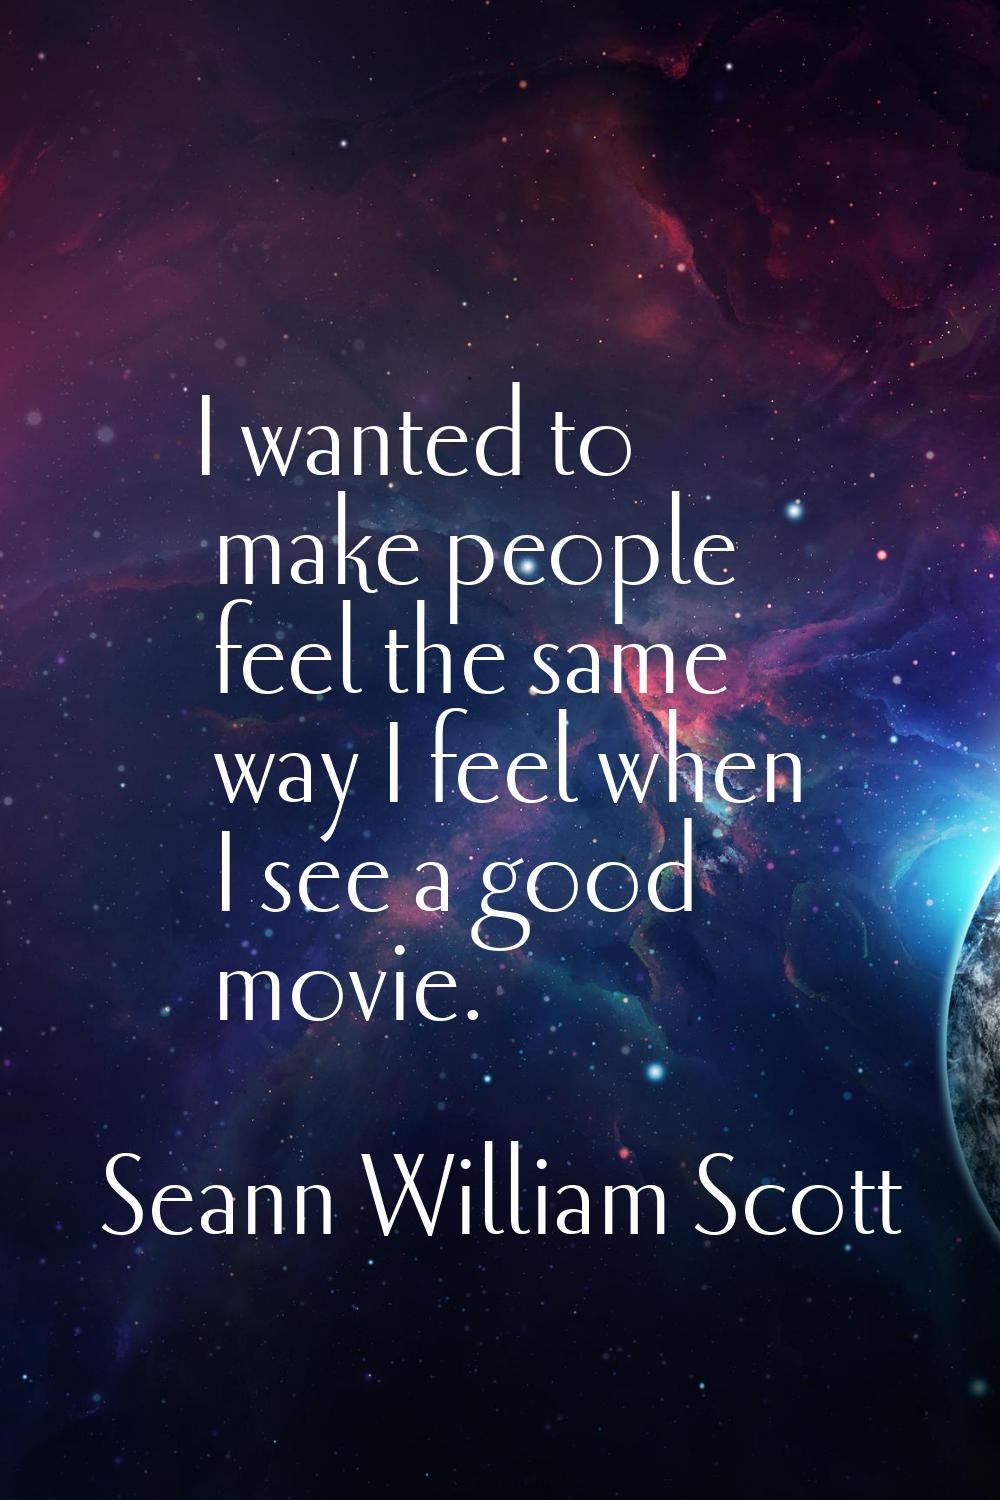 I wanted to make people feel the same way I feel when I see a good movie.